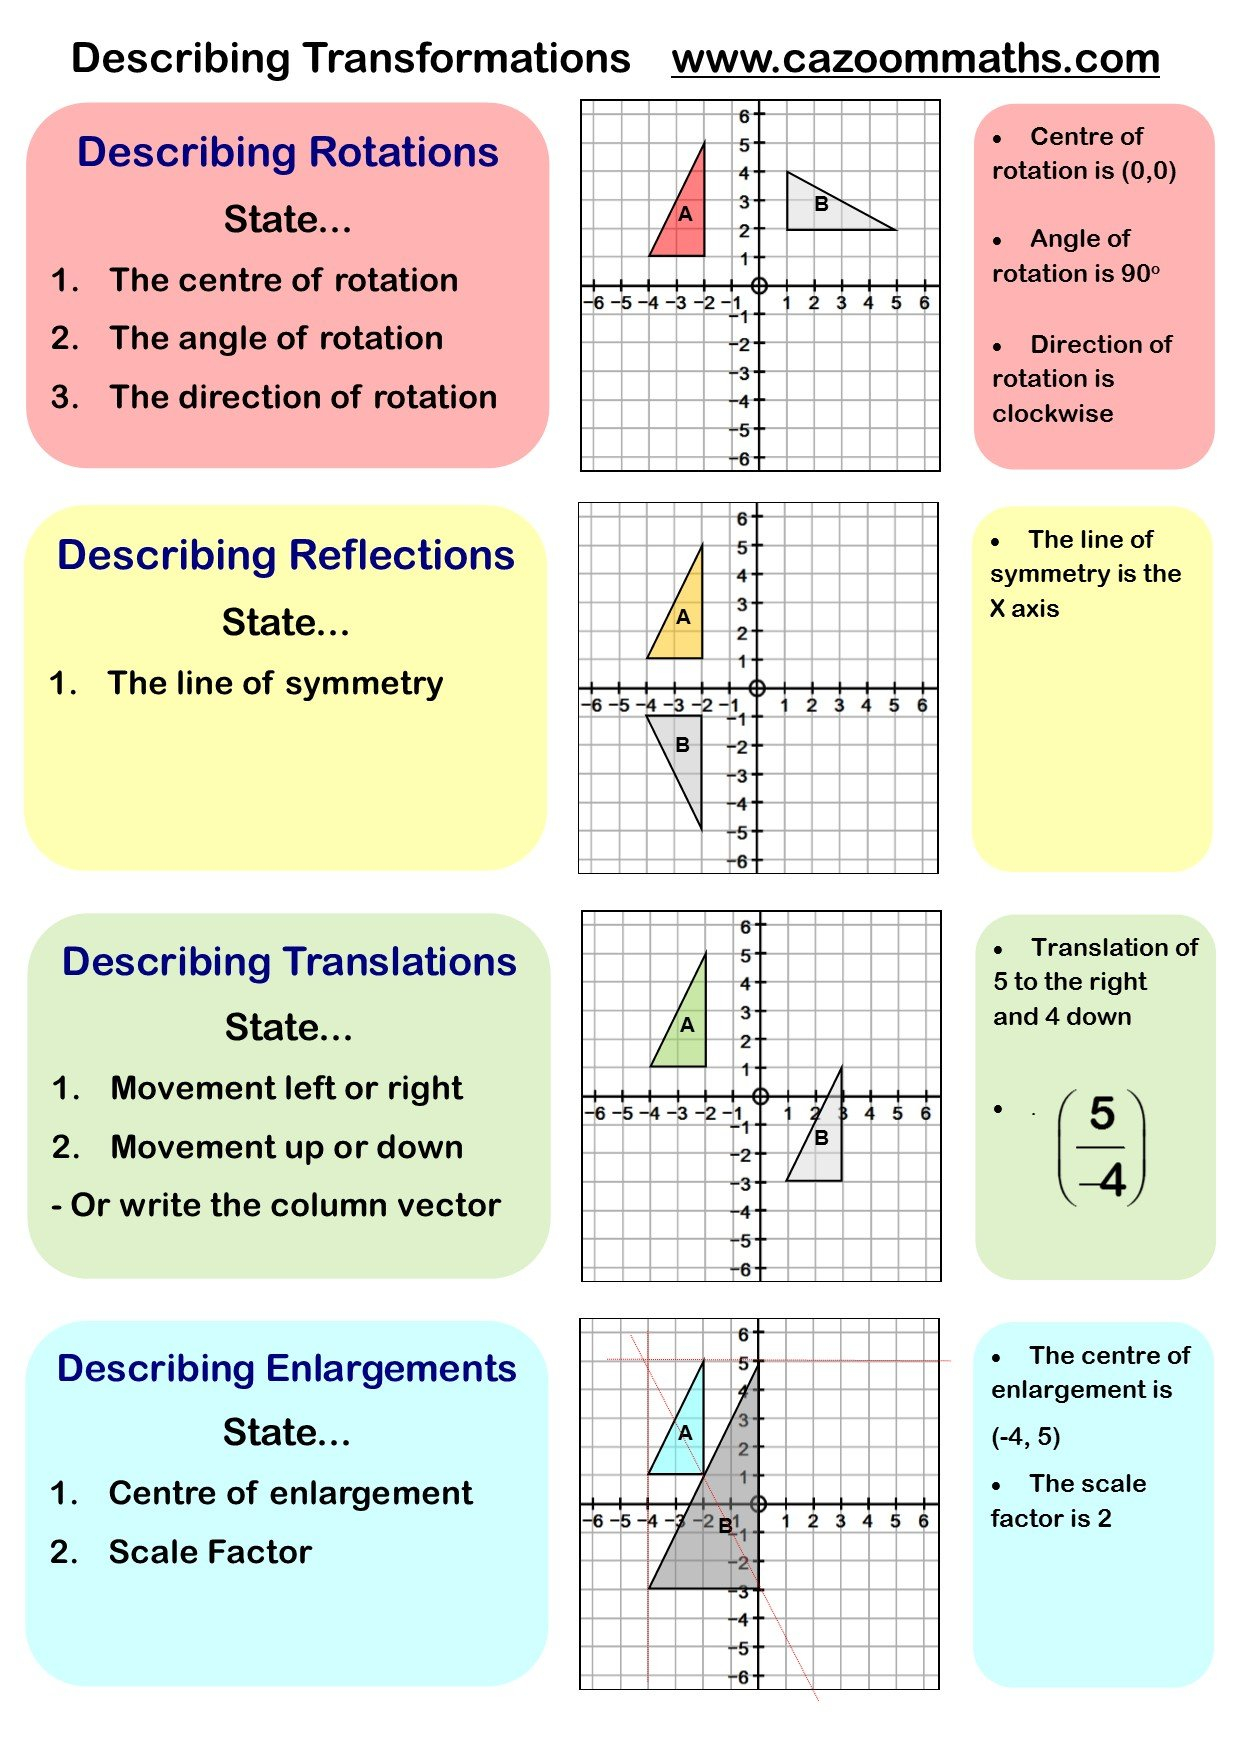 Transformations Worksheets Geometry  Cazoom Maths For Transformations Review Worksheet